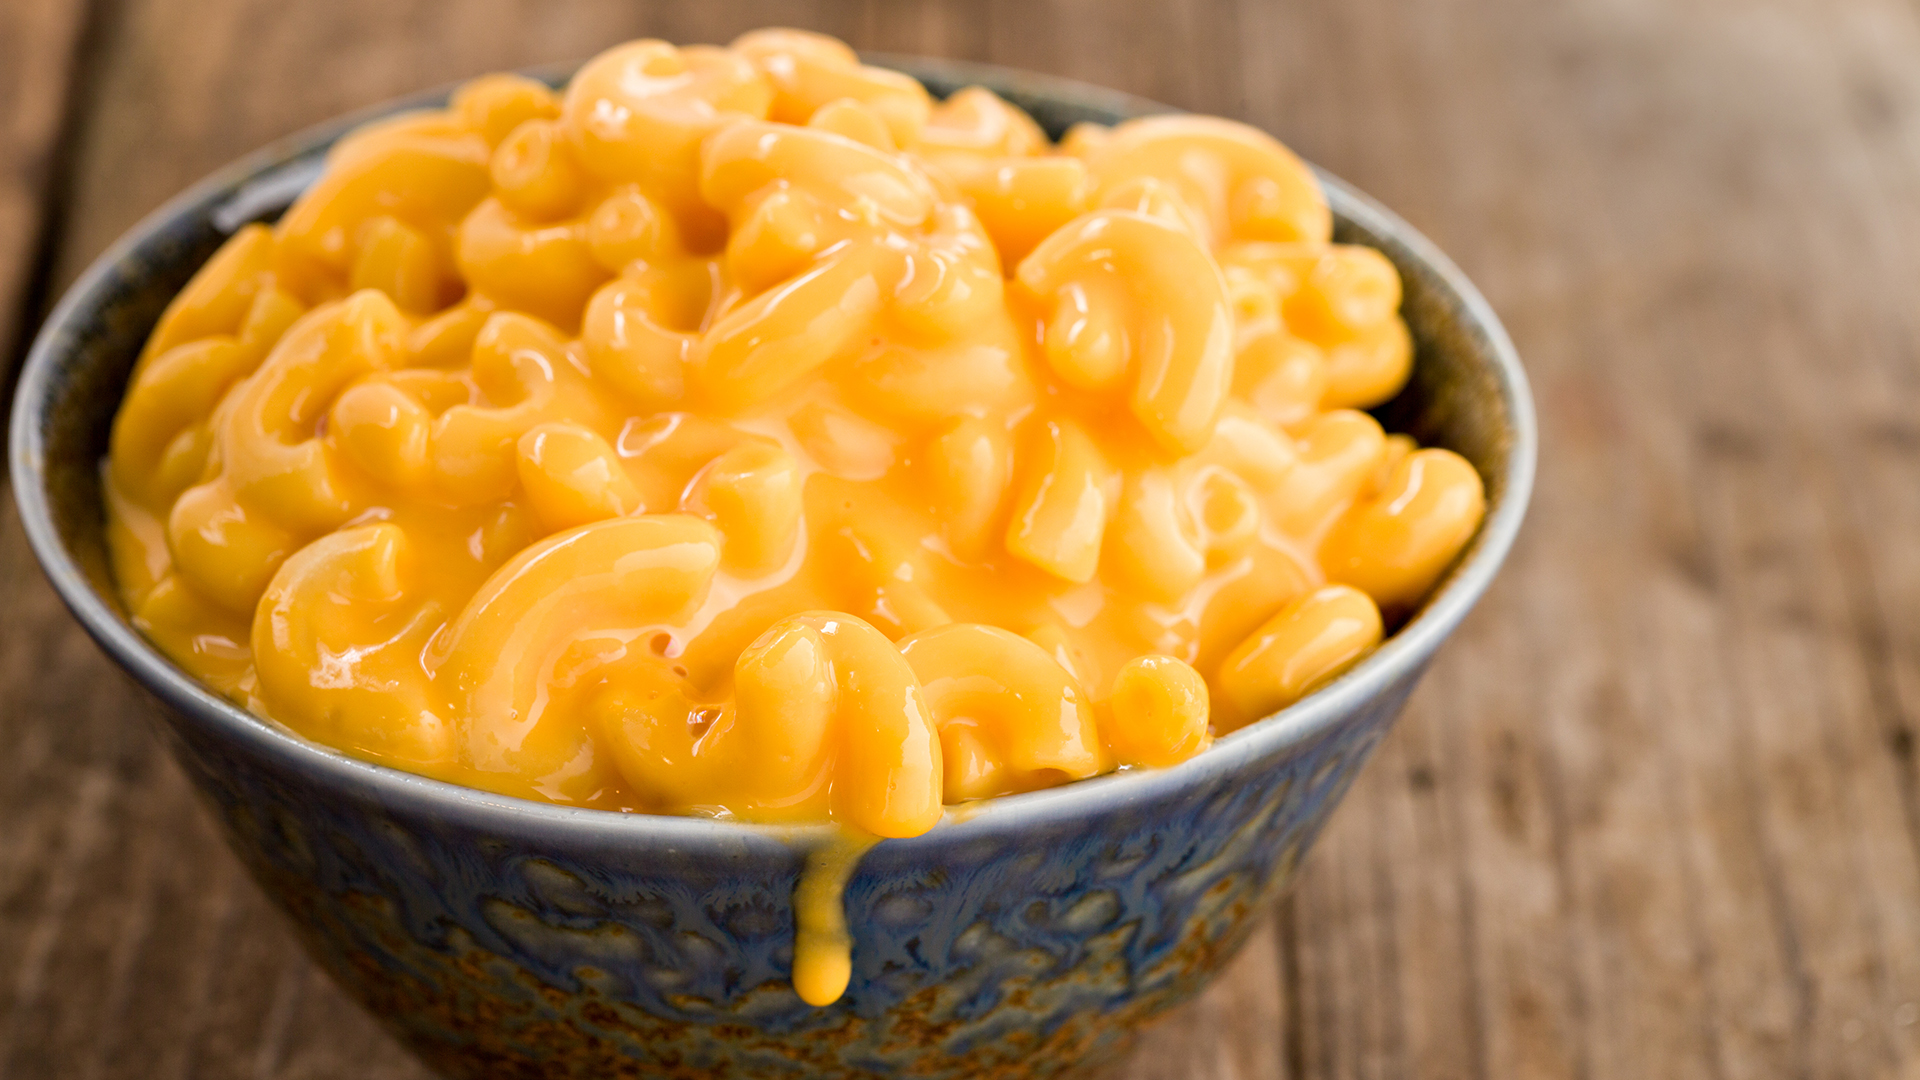 Costco’s 27-Pound Tub of Mac and Cheese Is Sold Out, but Here Are...